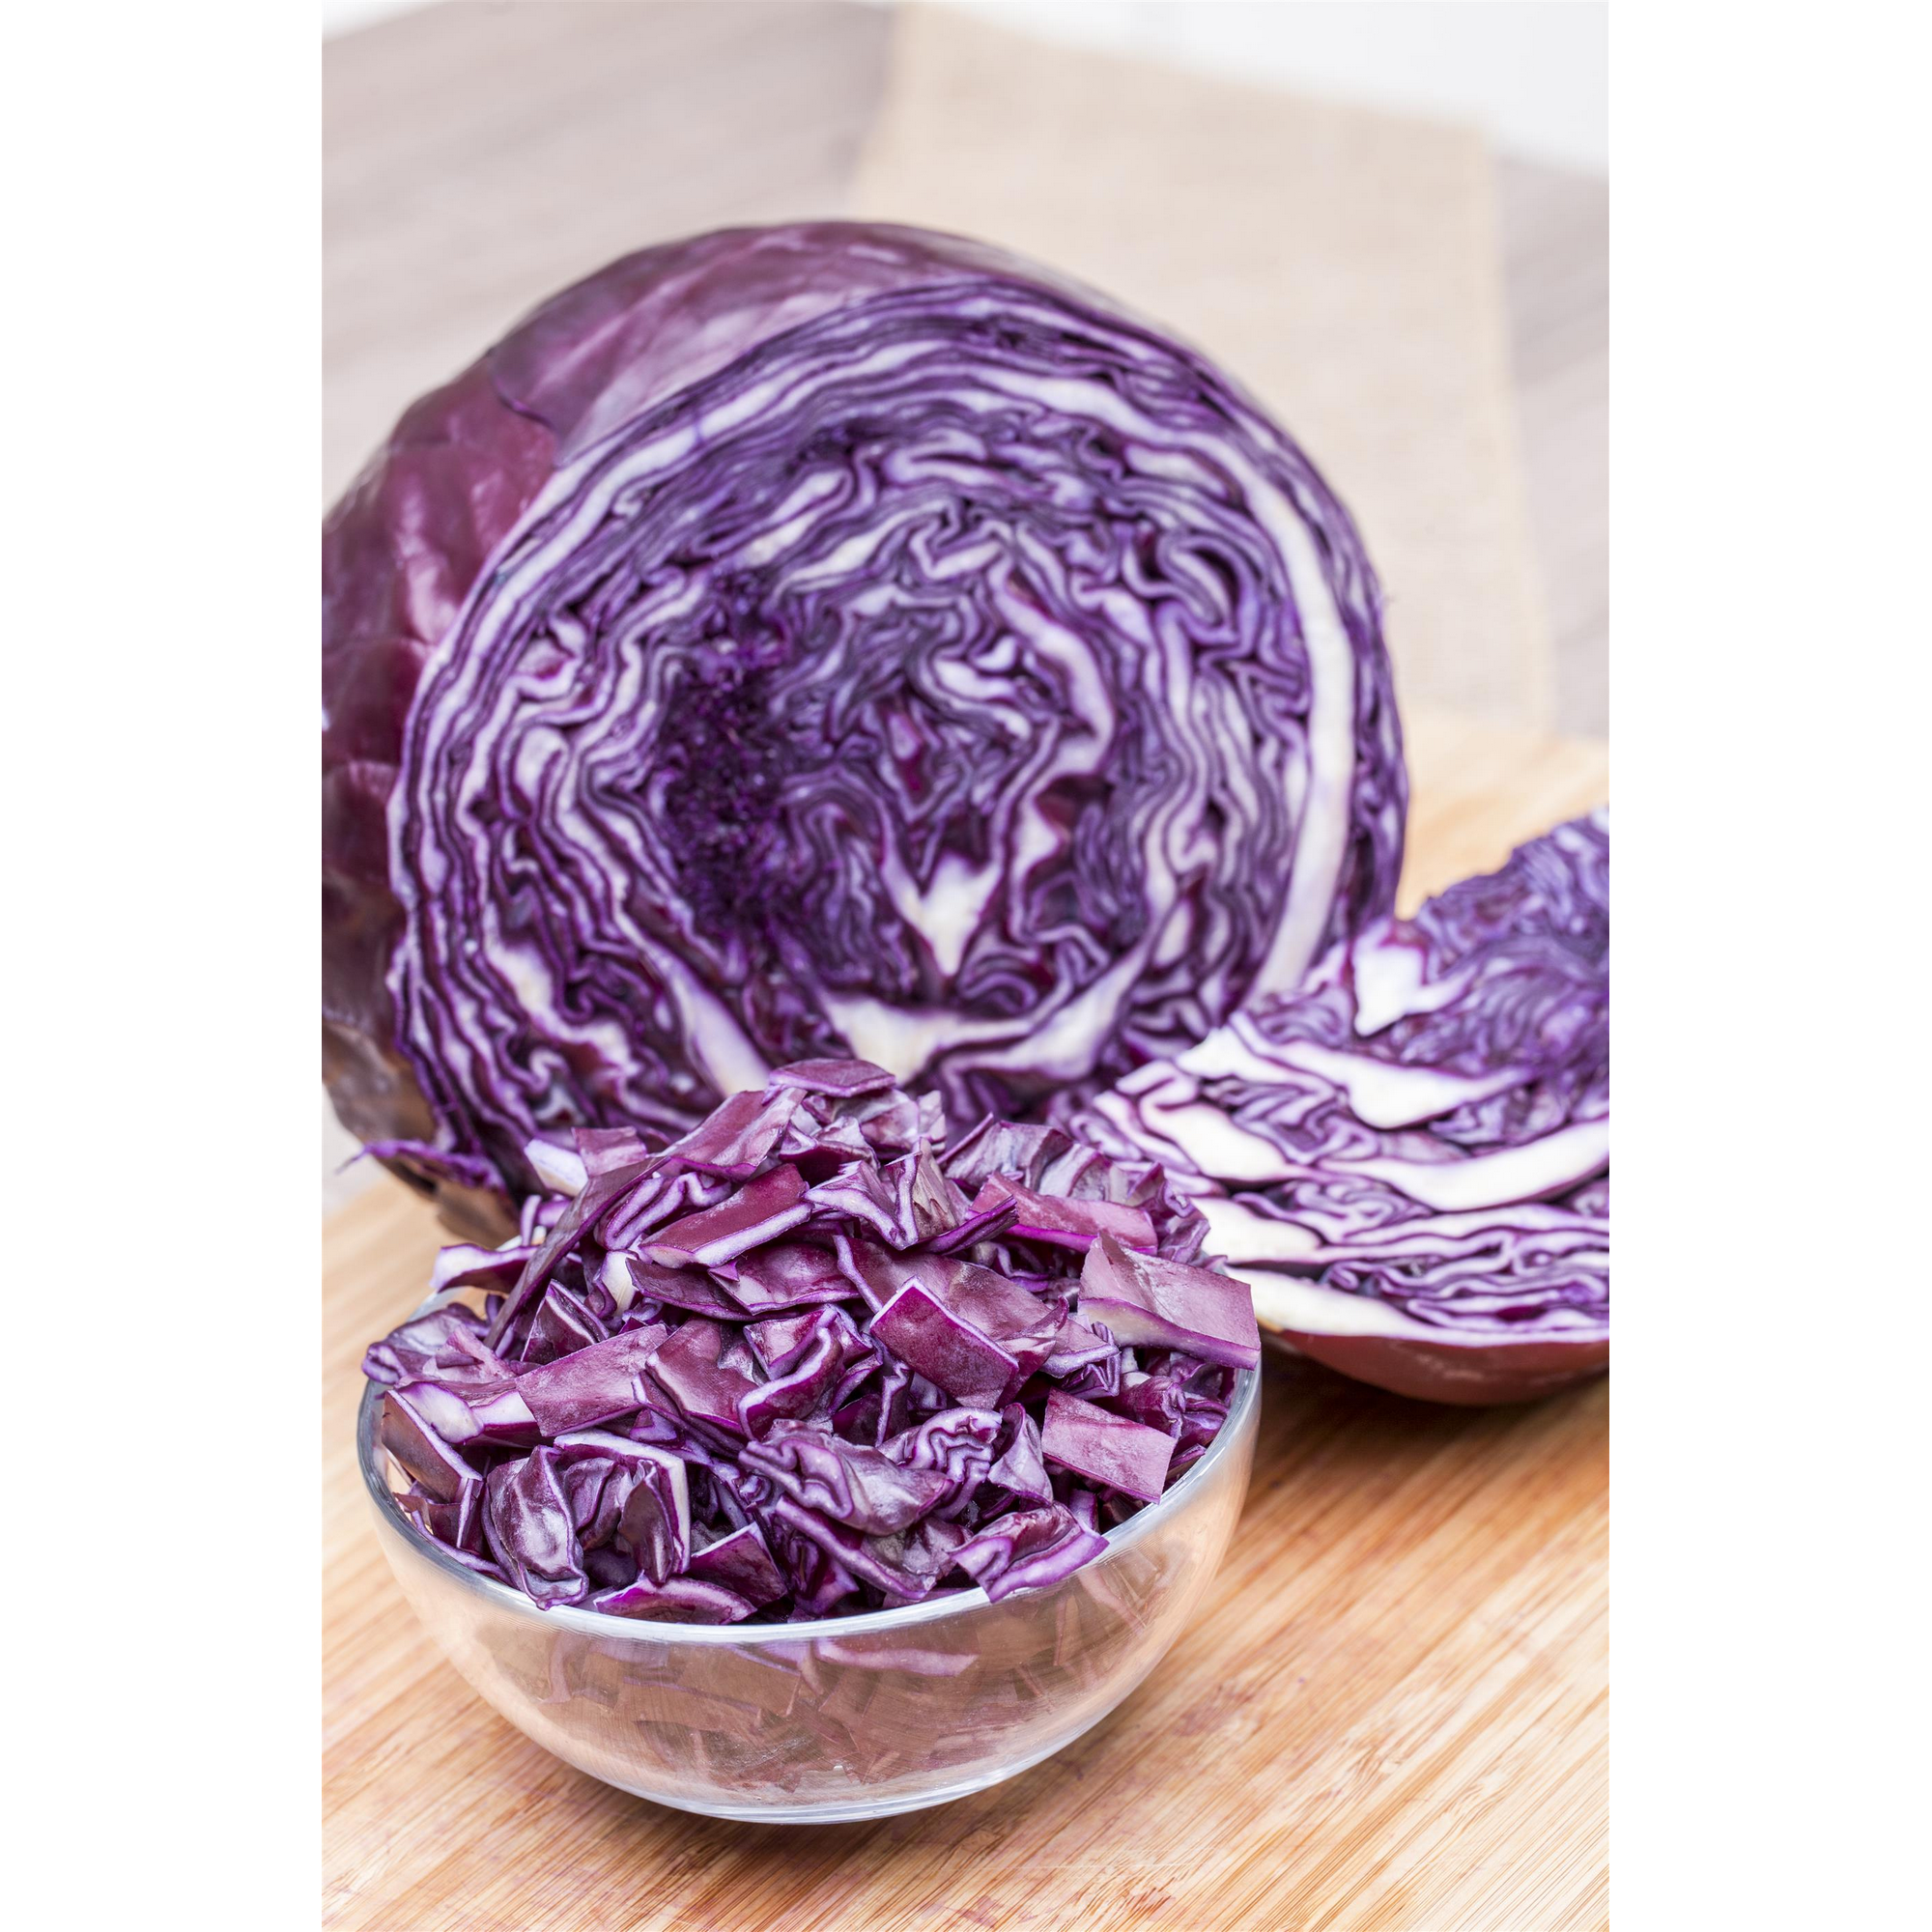 Rotkohl 6er-Schale + product picture